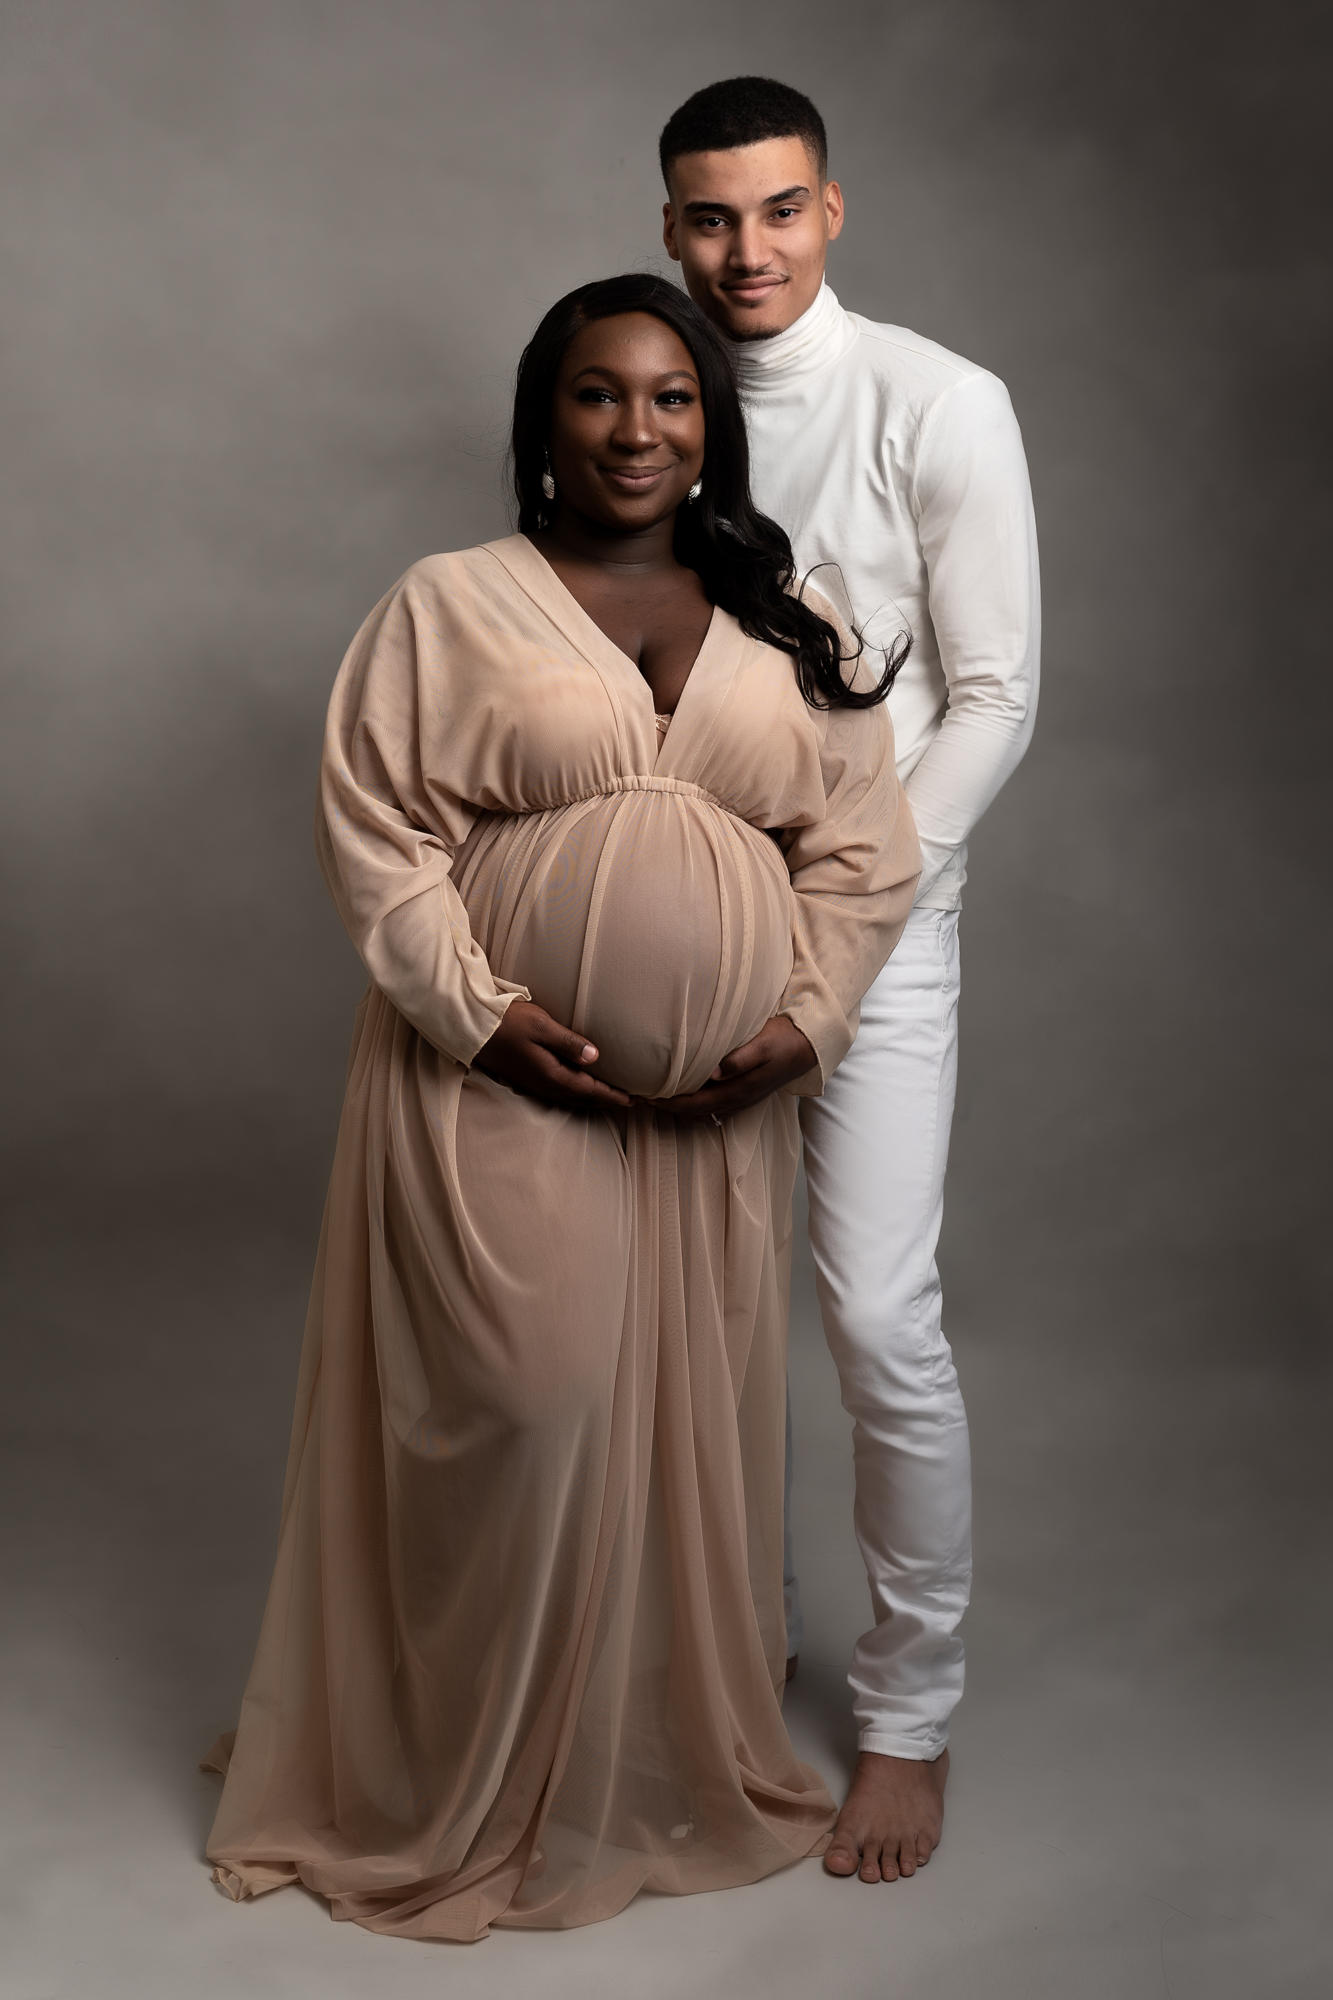 Can My Husband Be in My Maternity Photoshoot?